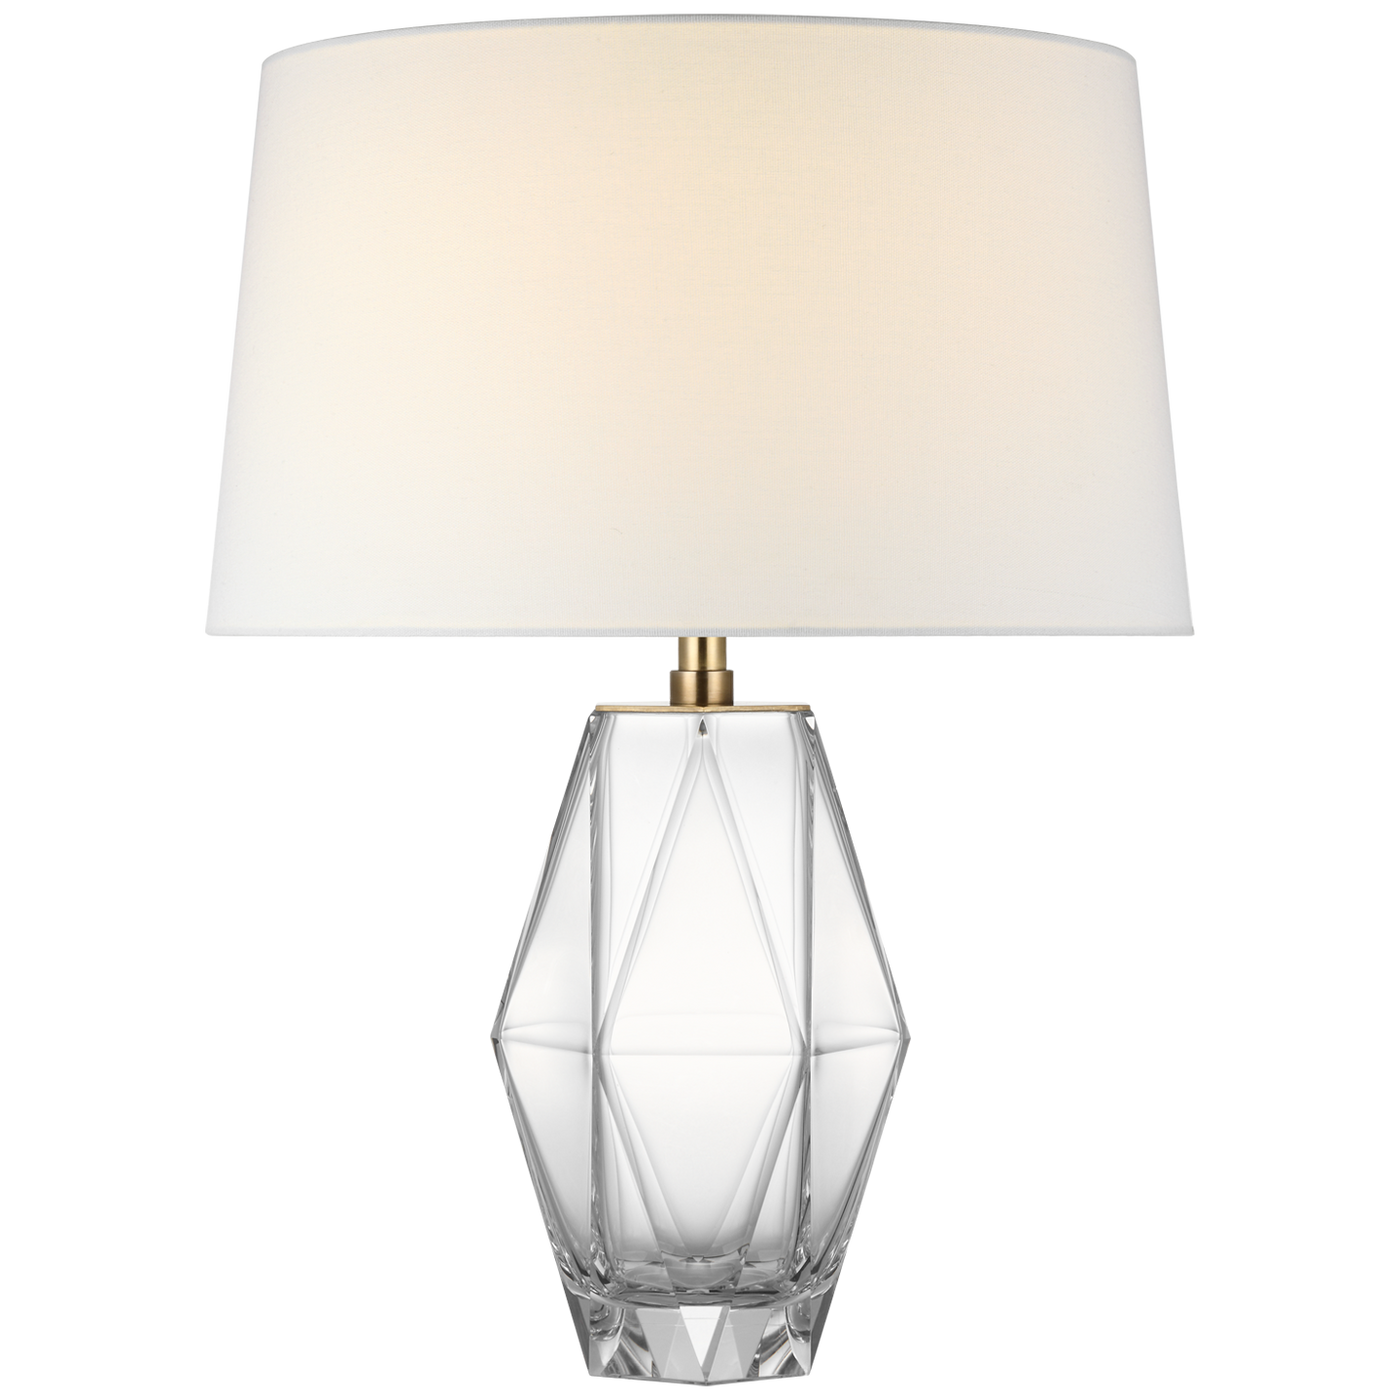 TABLE LAMP HEXAGONAL GLASS (Available in 3 Finishes)